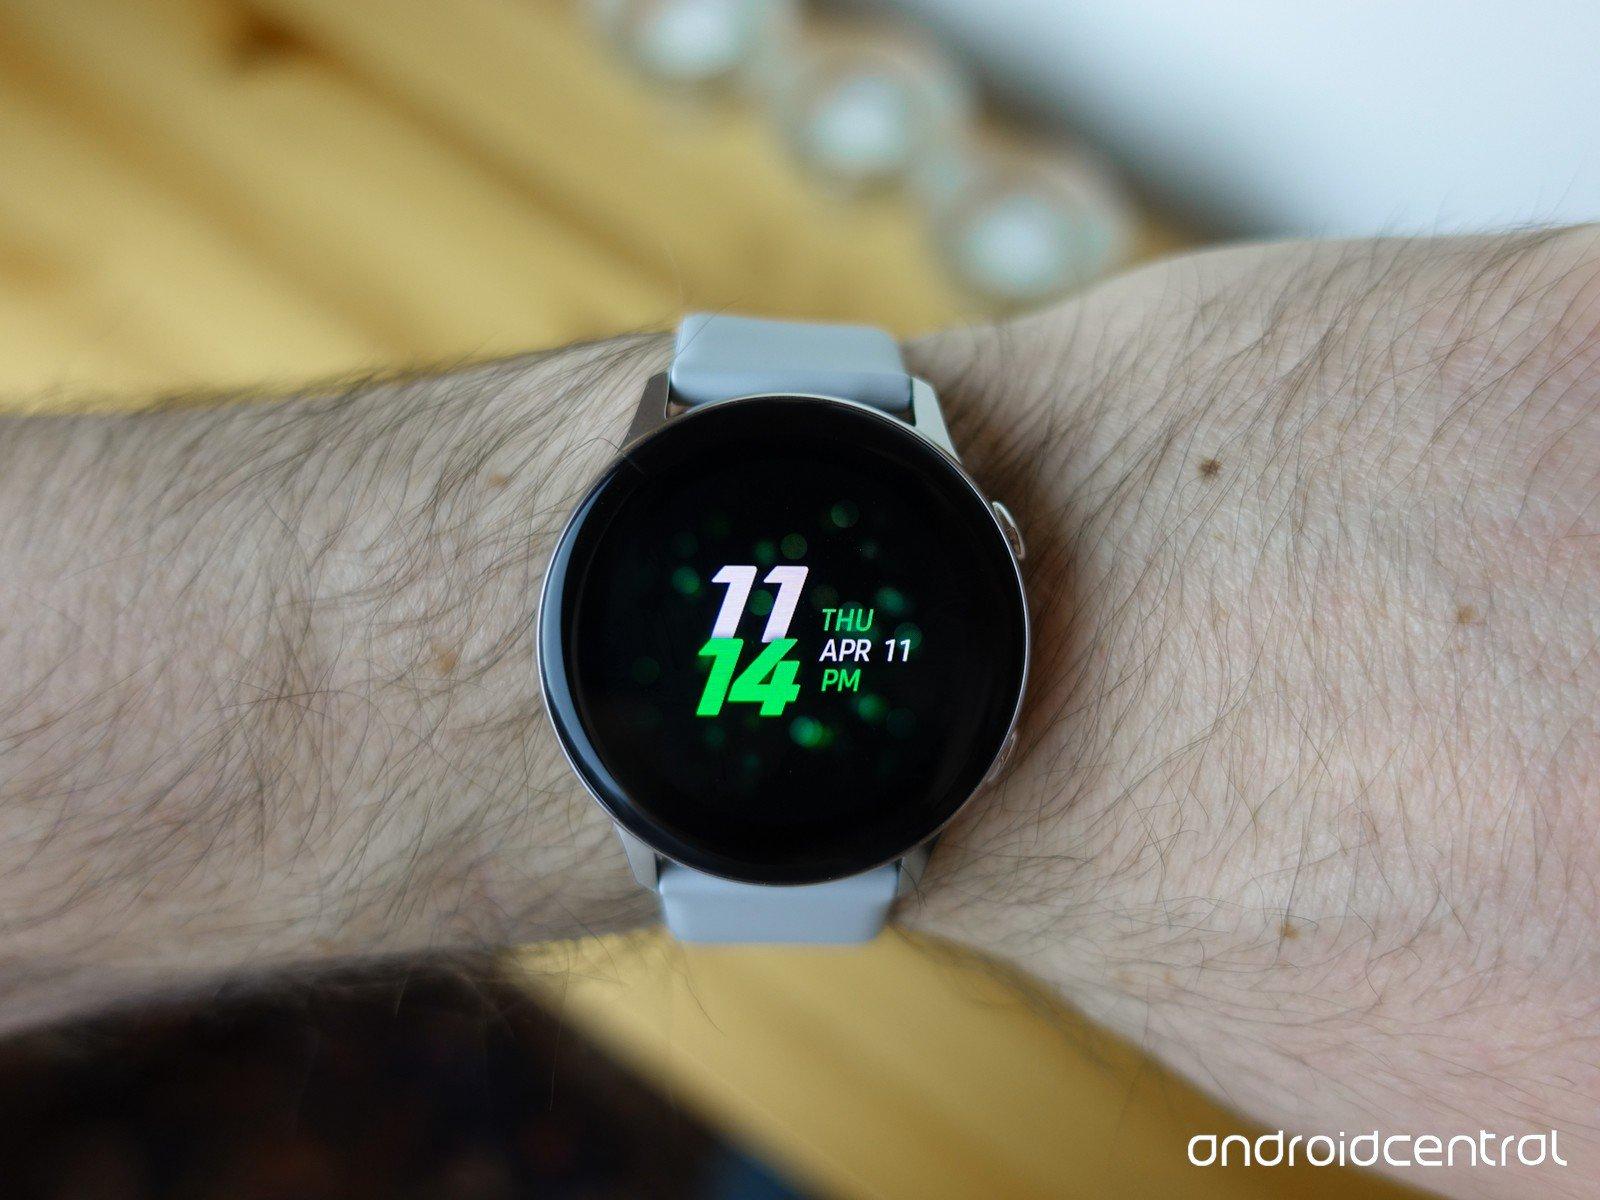 Samsung Galaxy Watch Active: Everything you need to know!